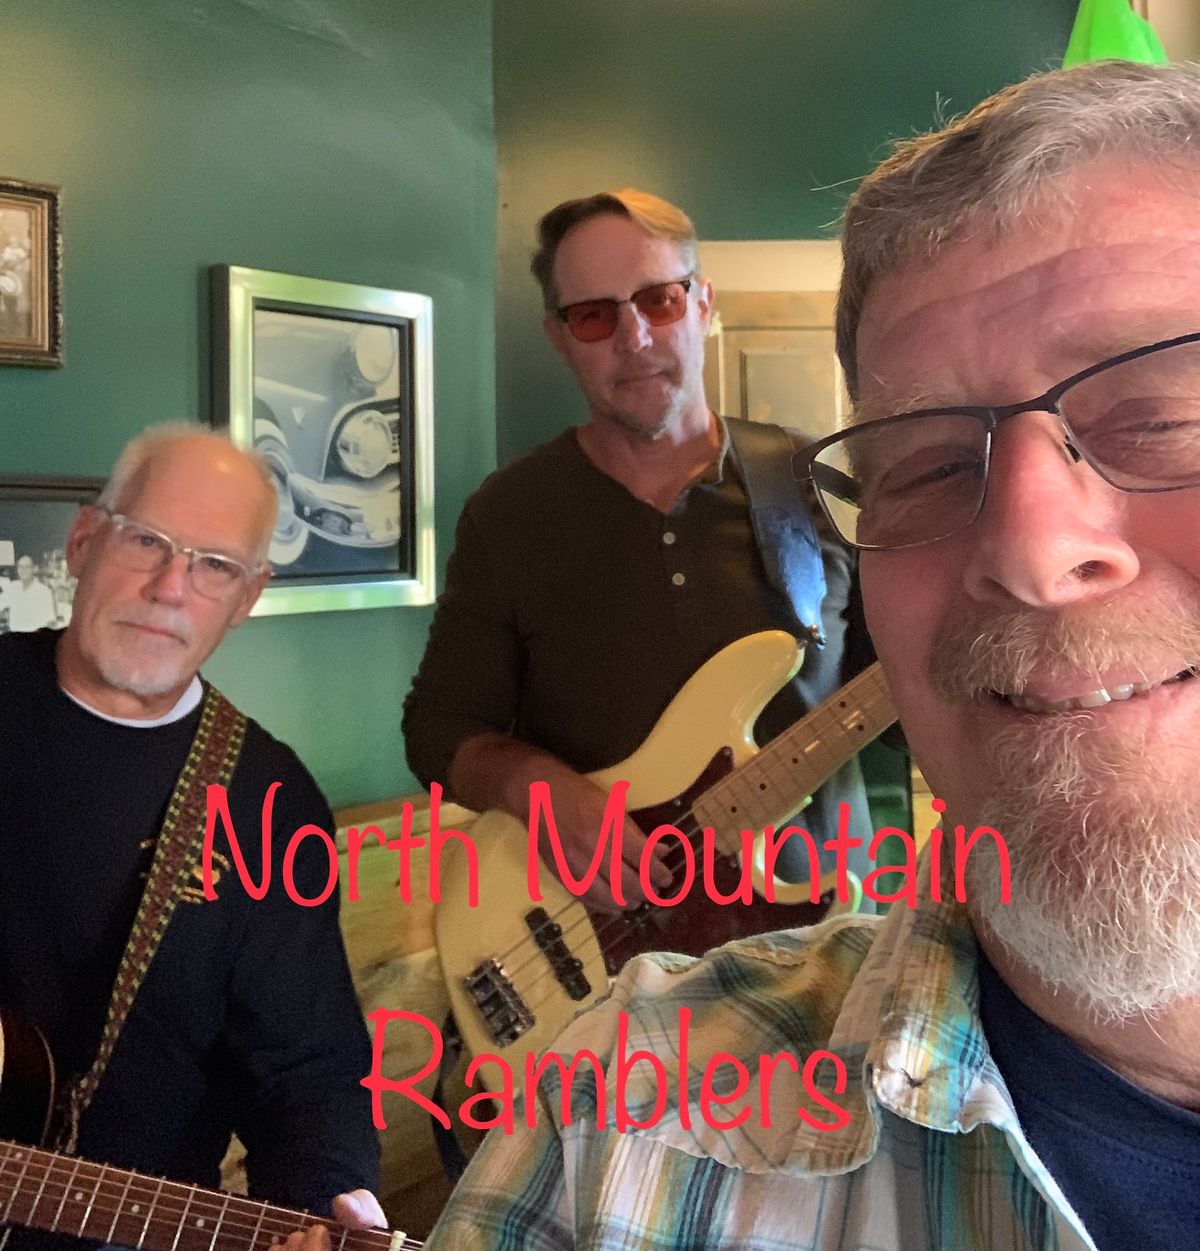 EVENTS AT THE BARN FEATURING NORTH MOUNTAIN RAMBLERS